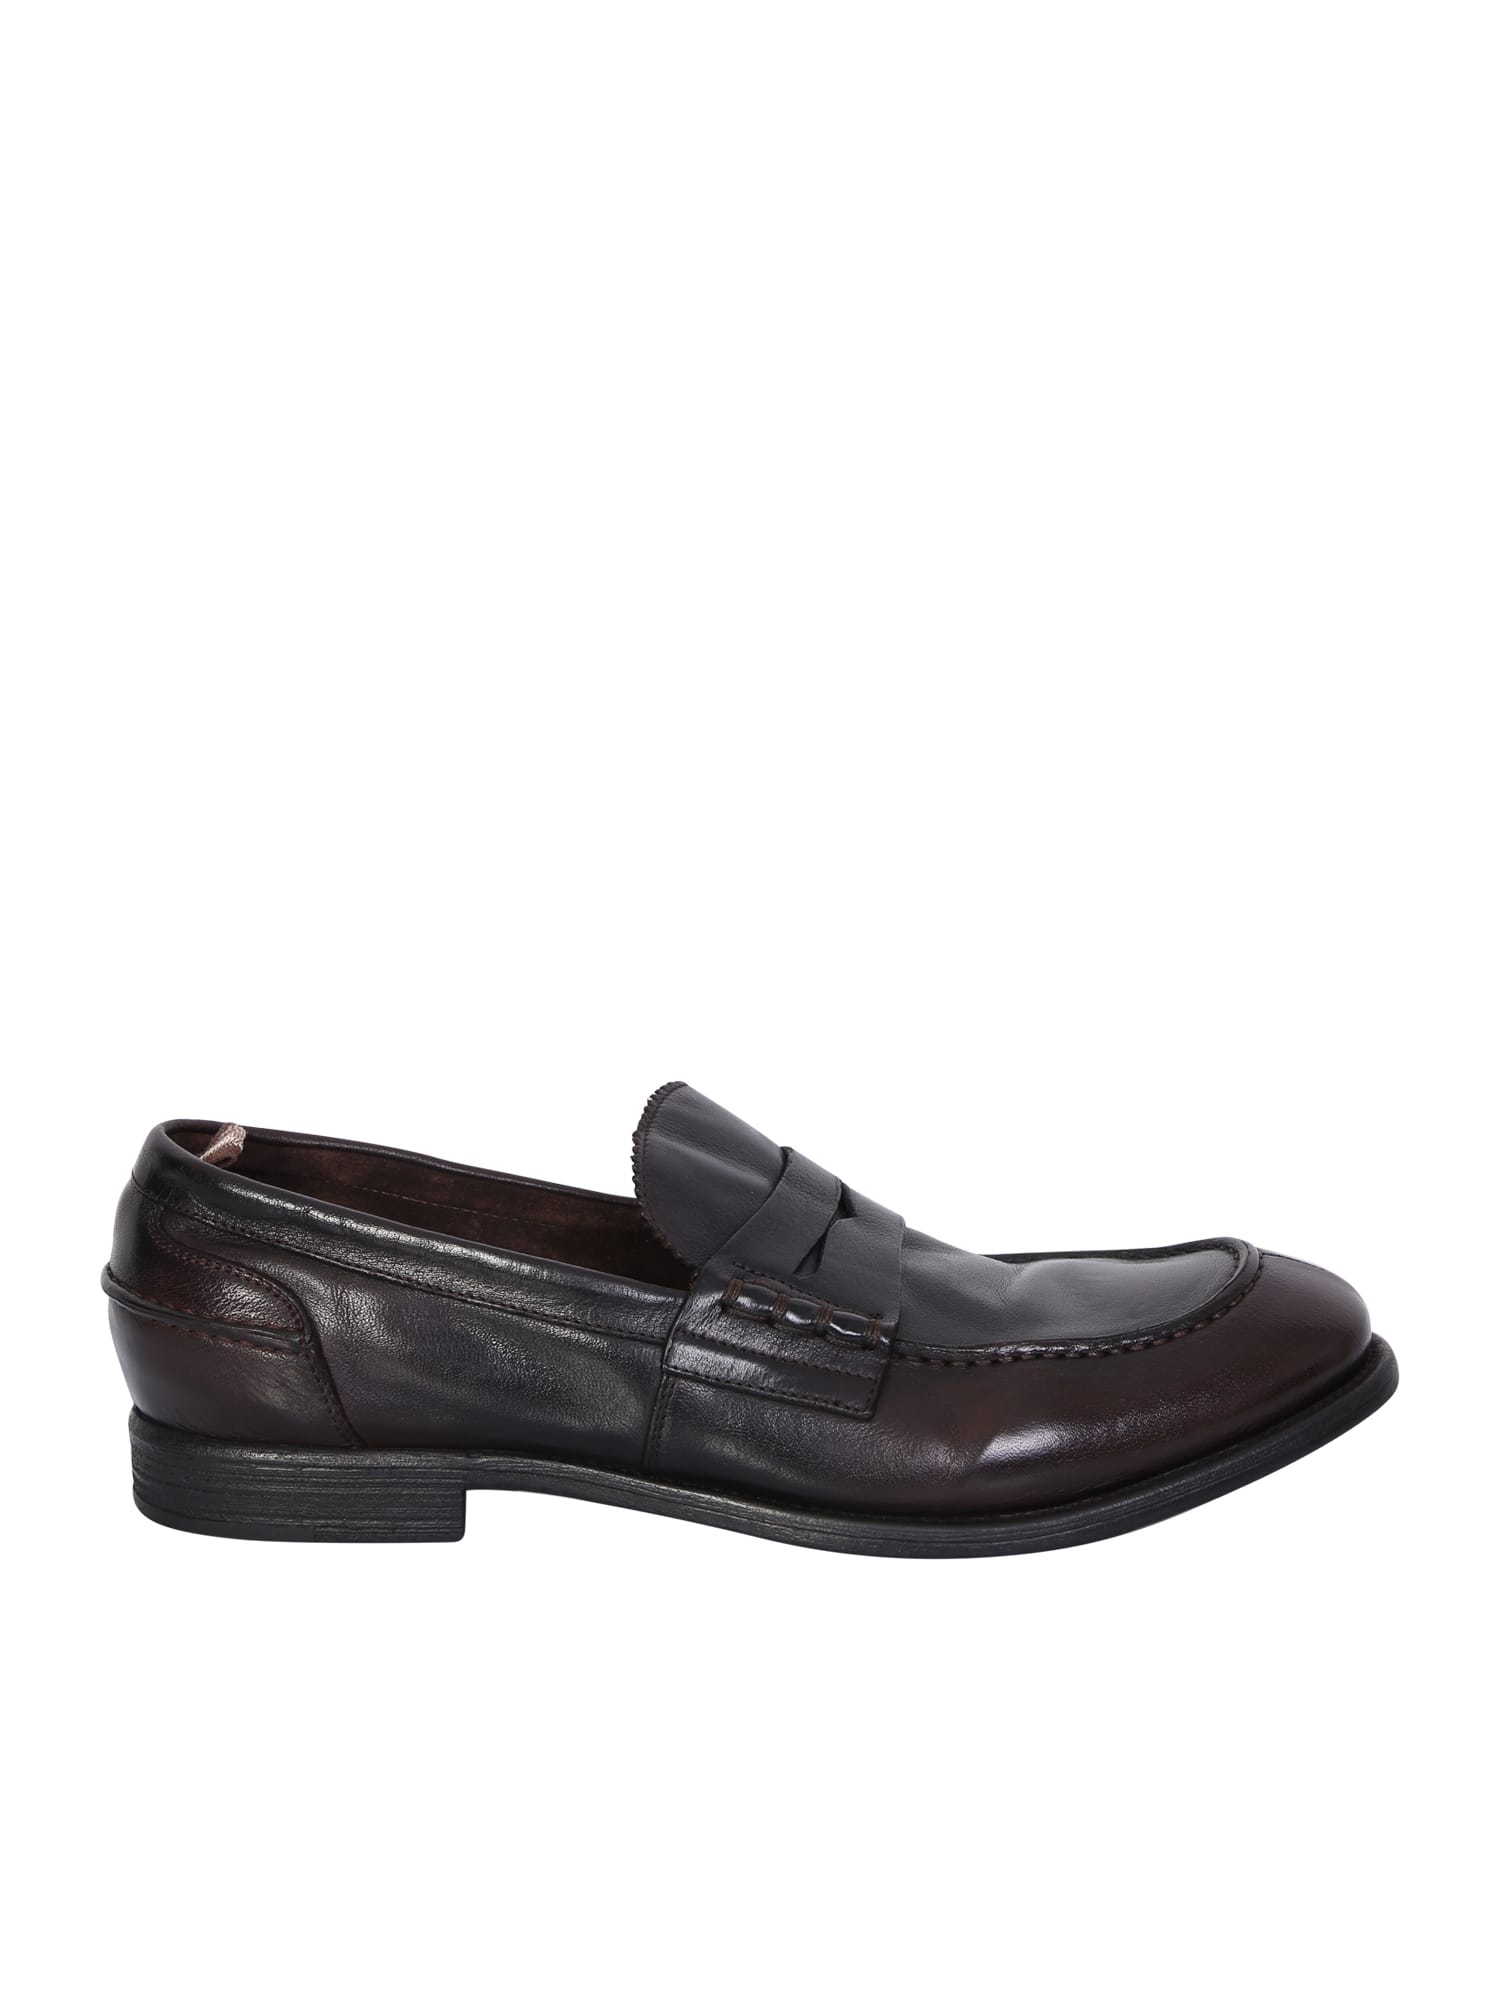 Chronicle 144 Brown Loafers